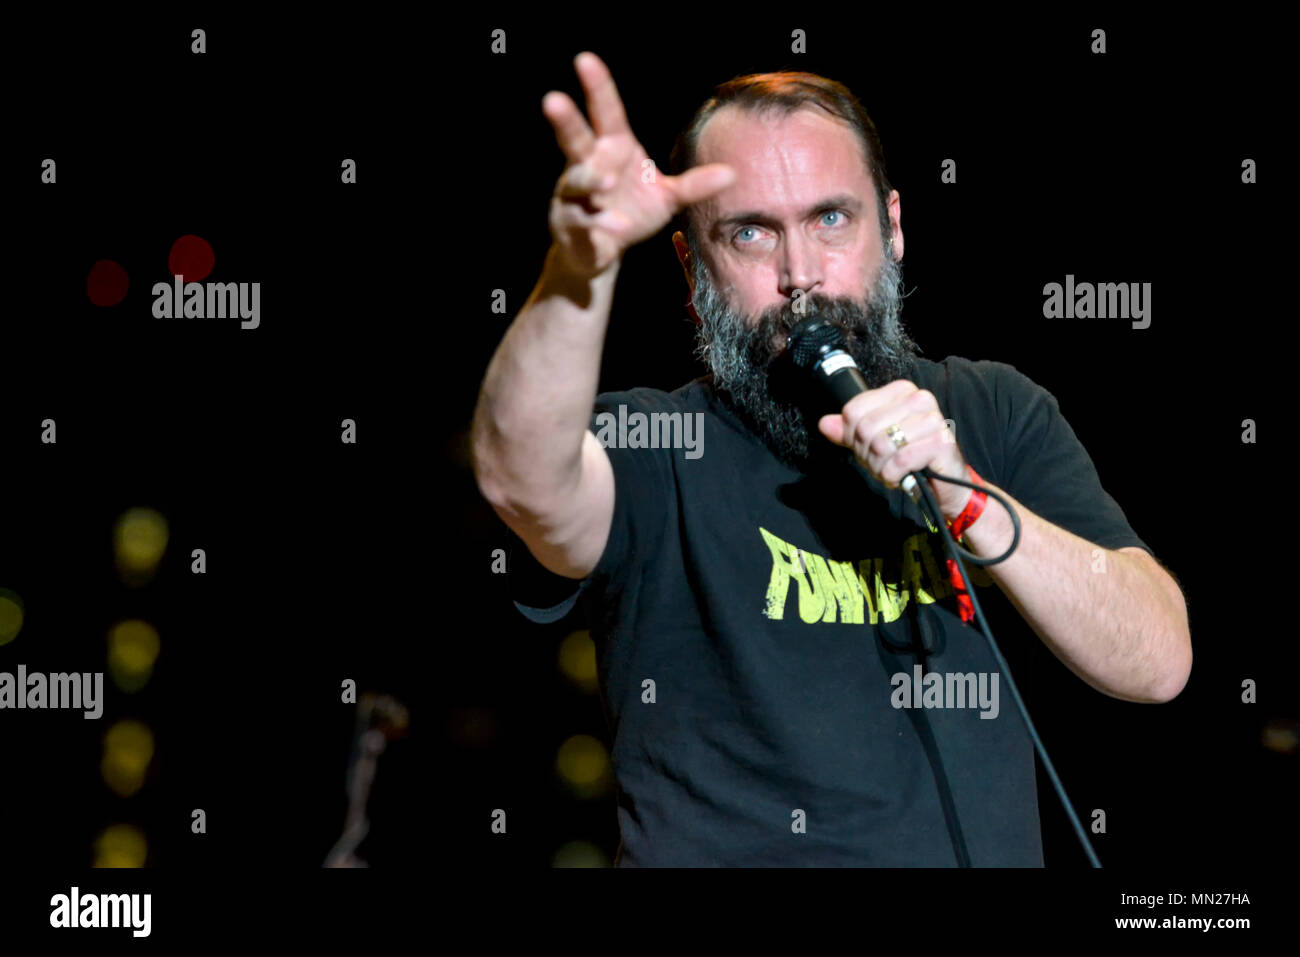 Las Vegas Nevada, April 20, 2018 - Lead singer for Clutch on stage at the second annual Las Rageous, a 2-day heavy metal music festival. Stock Photo